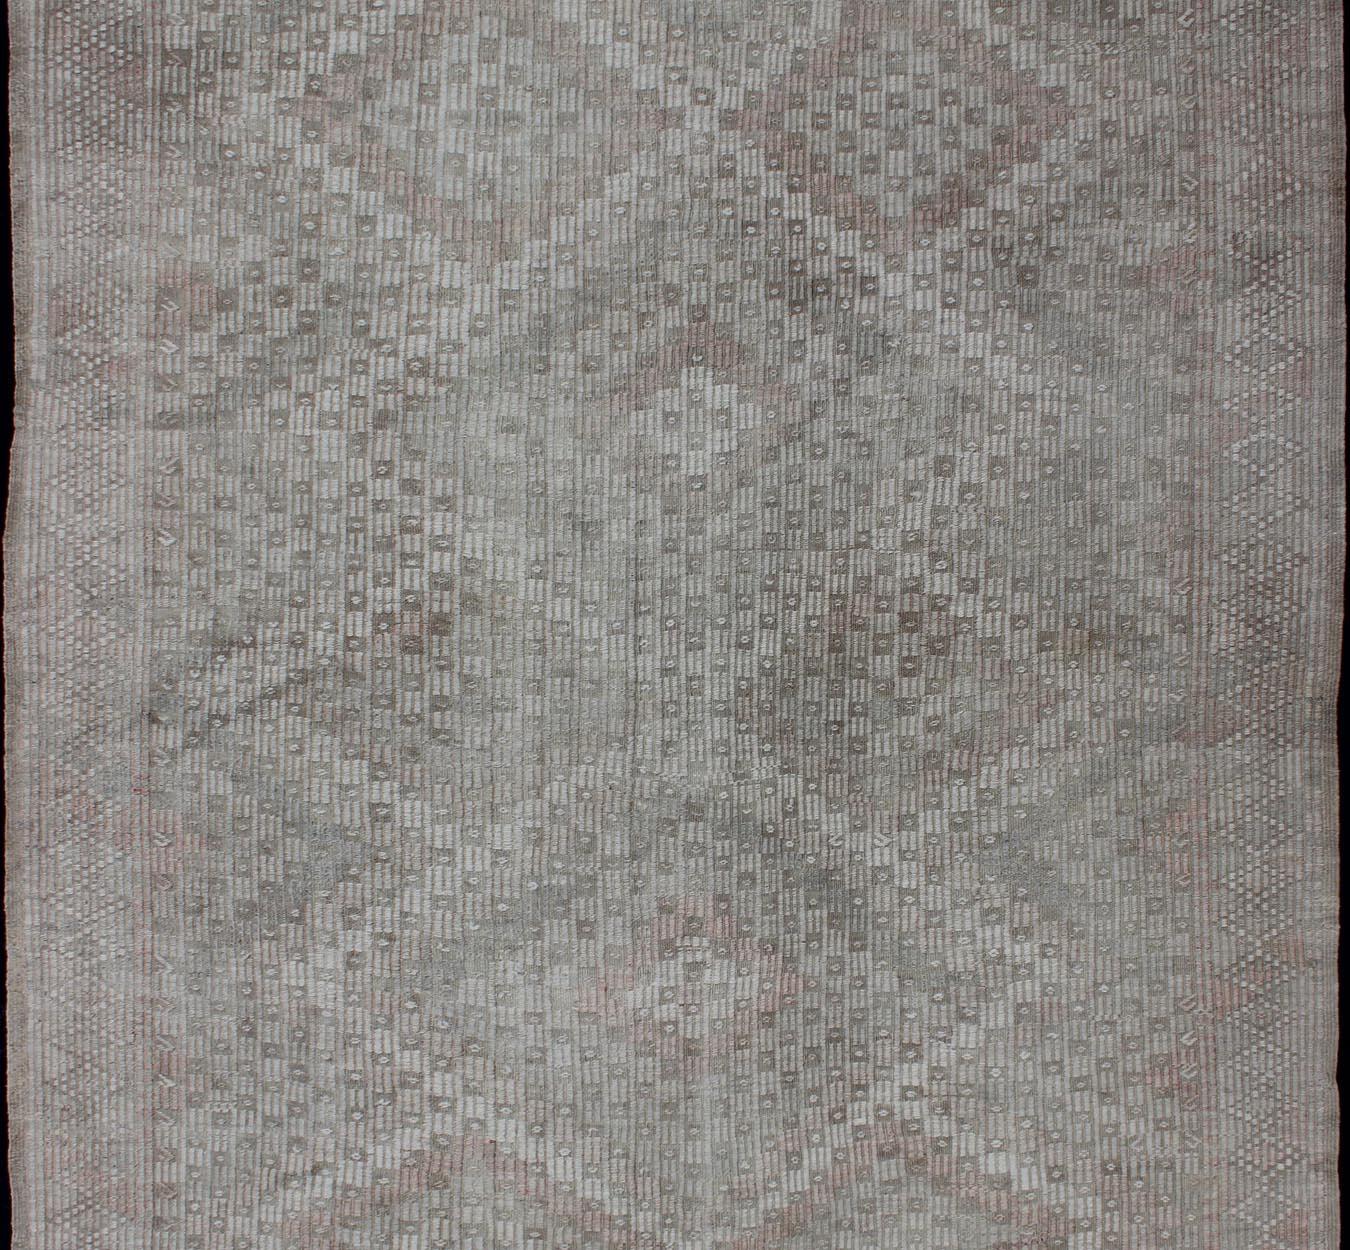 Hand-Woven Vintage Turkish Embroidered Rug with Geometric Diamond Design in Neutral Tones For Sale